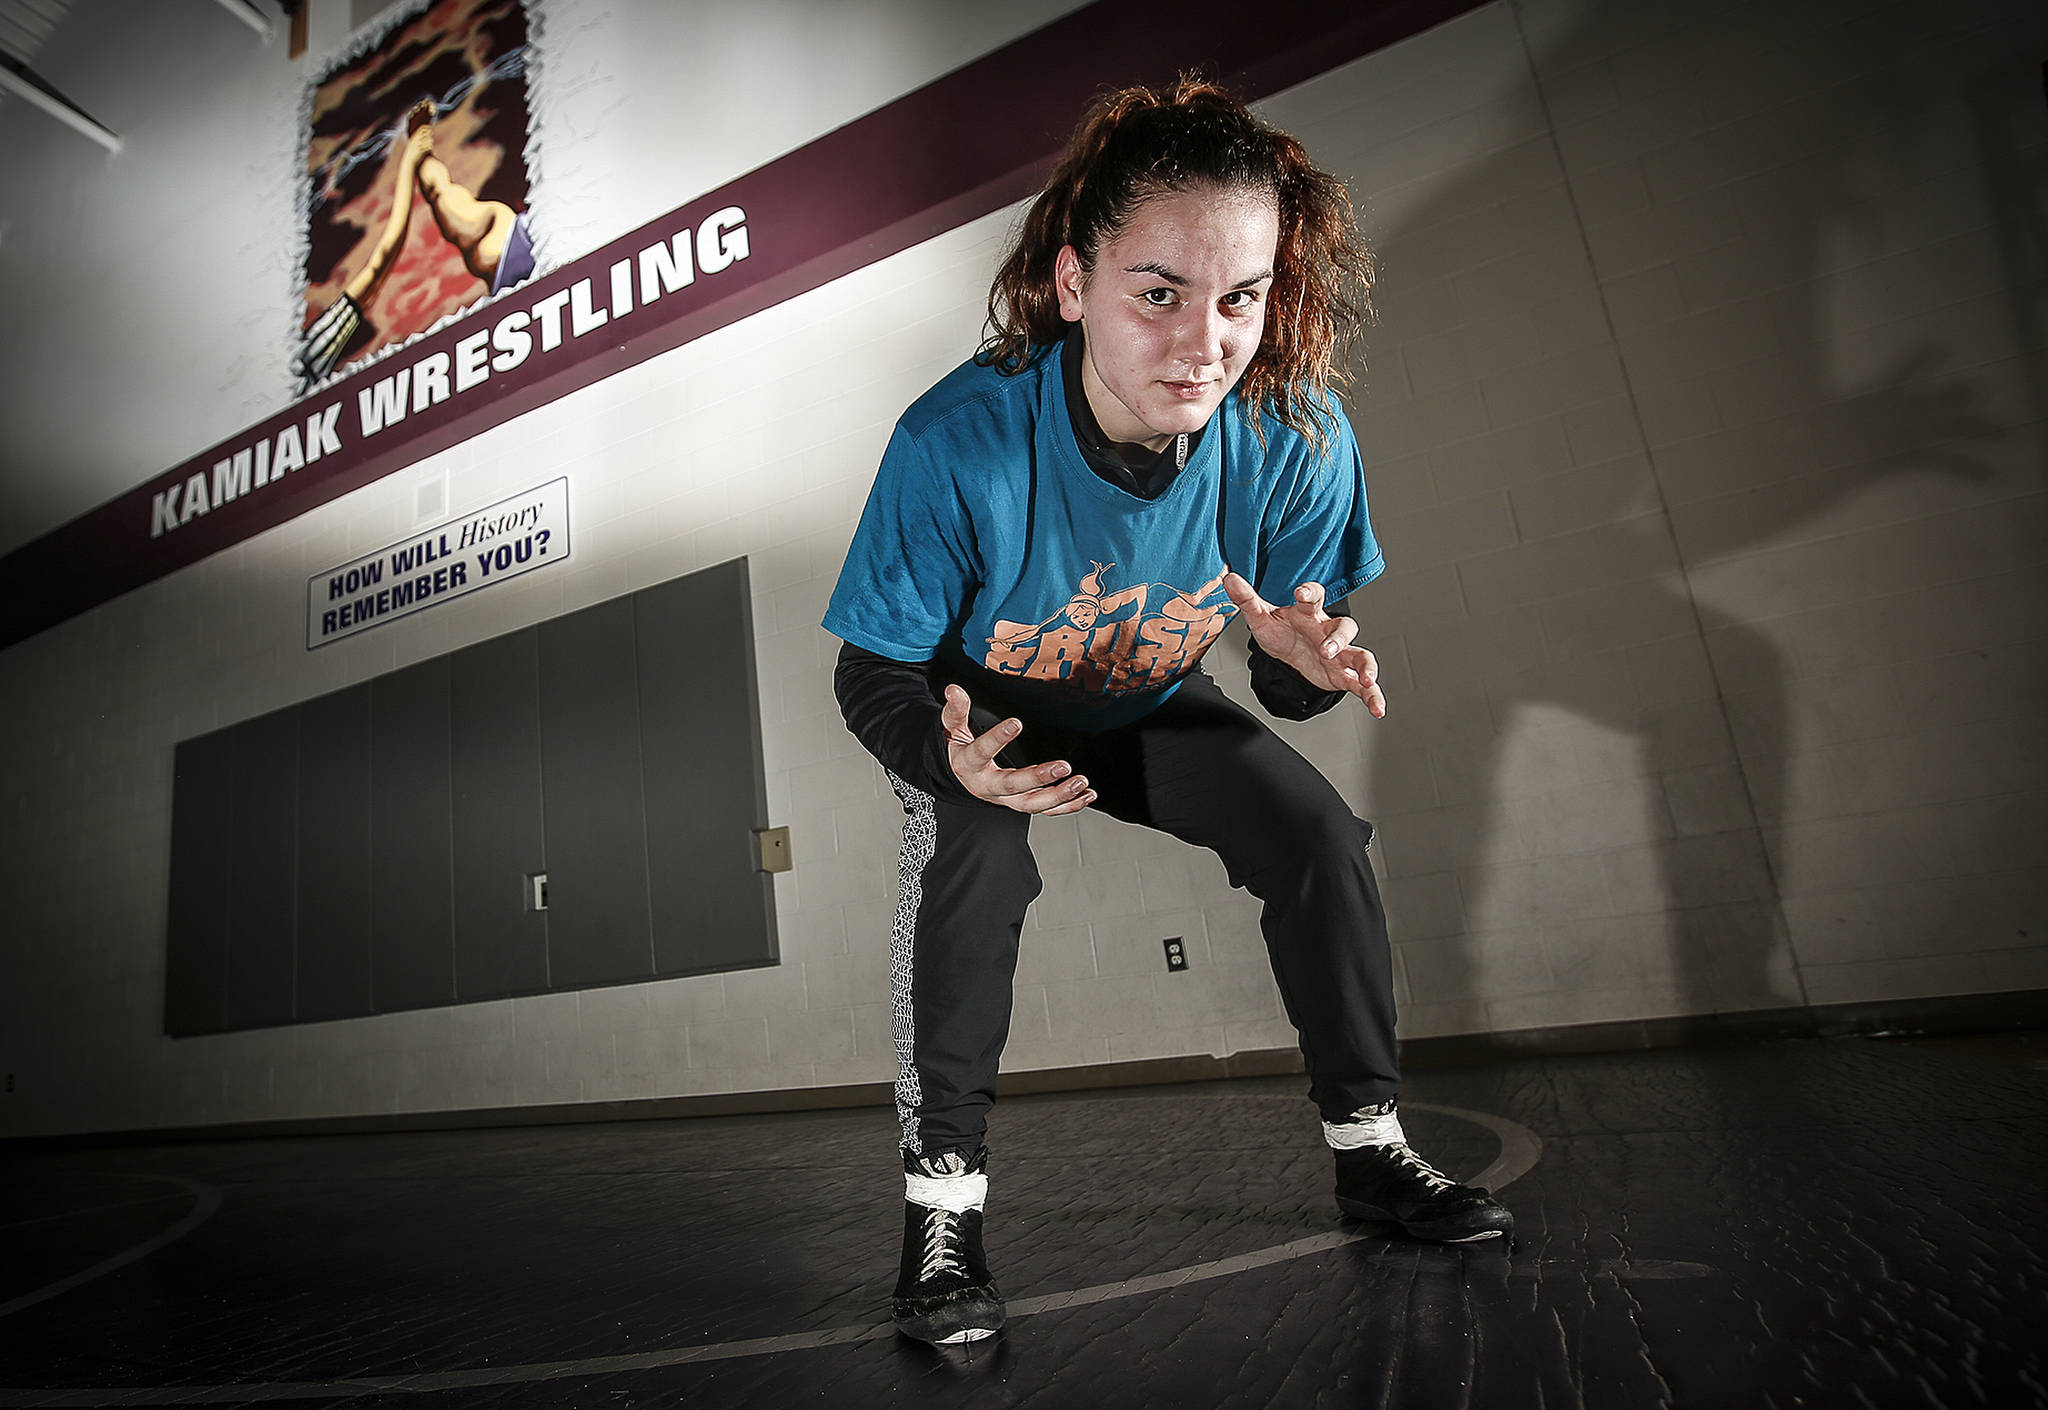 Kamiak senior Ally de la Cruz will look to defend her state wrestling title this weekend at Mat Classic XXX in Tacoma. (Ian Terry / The Herald)